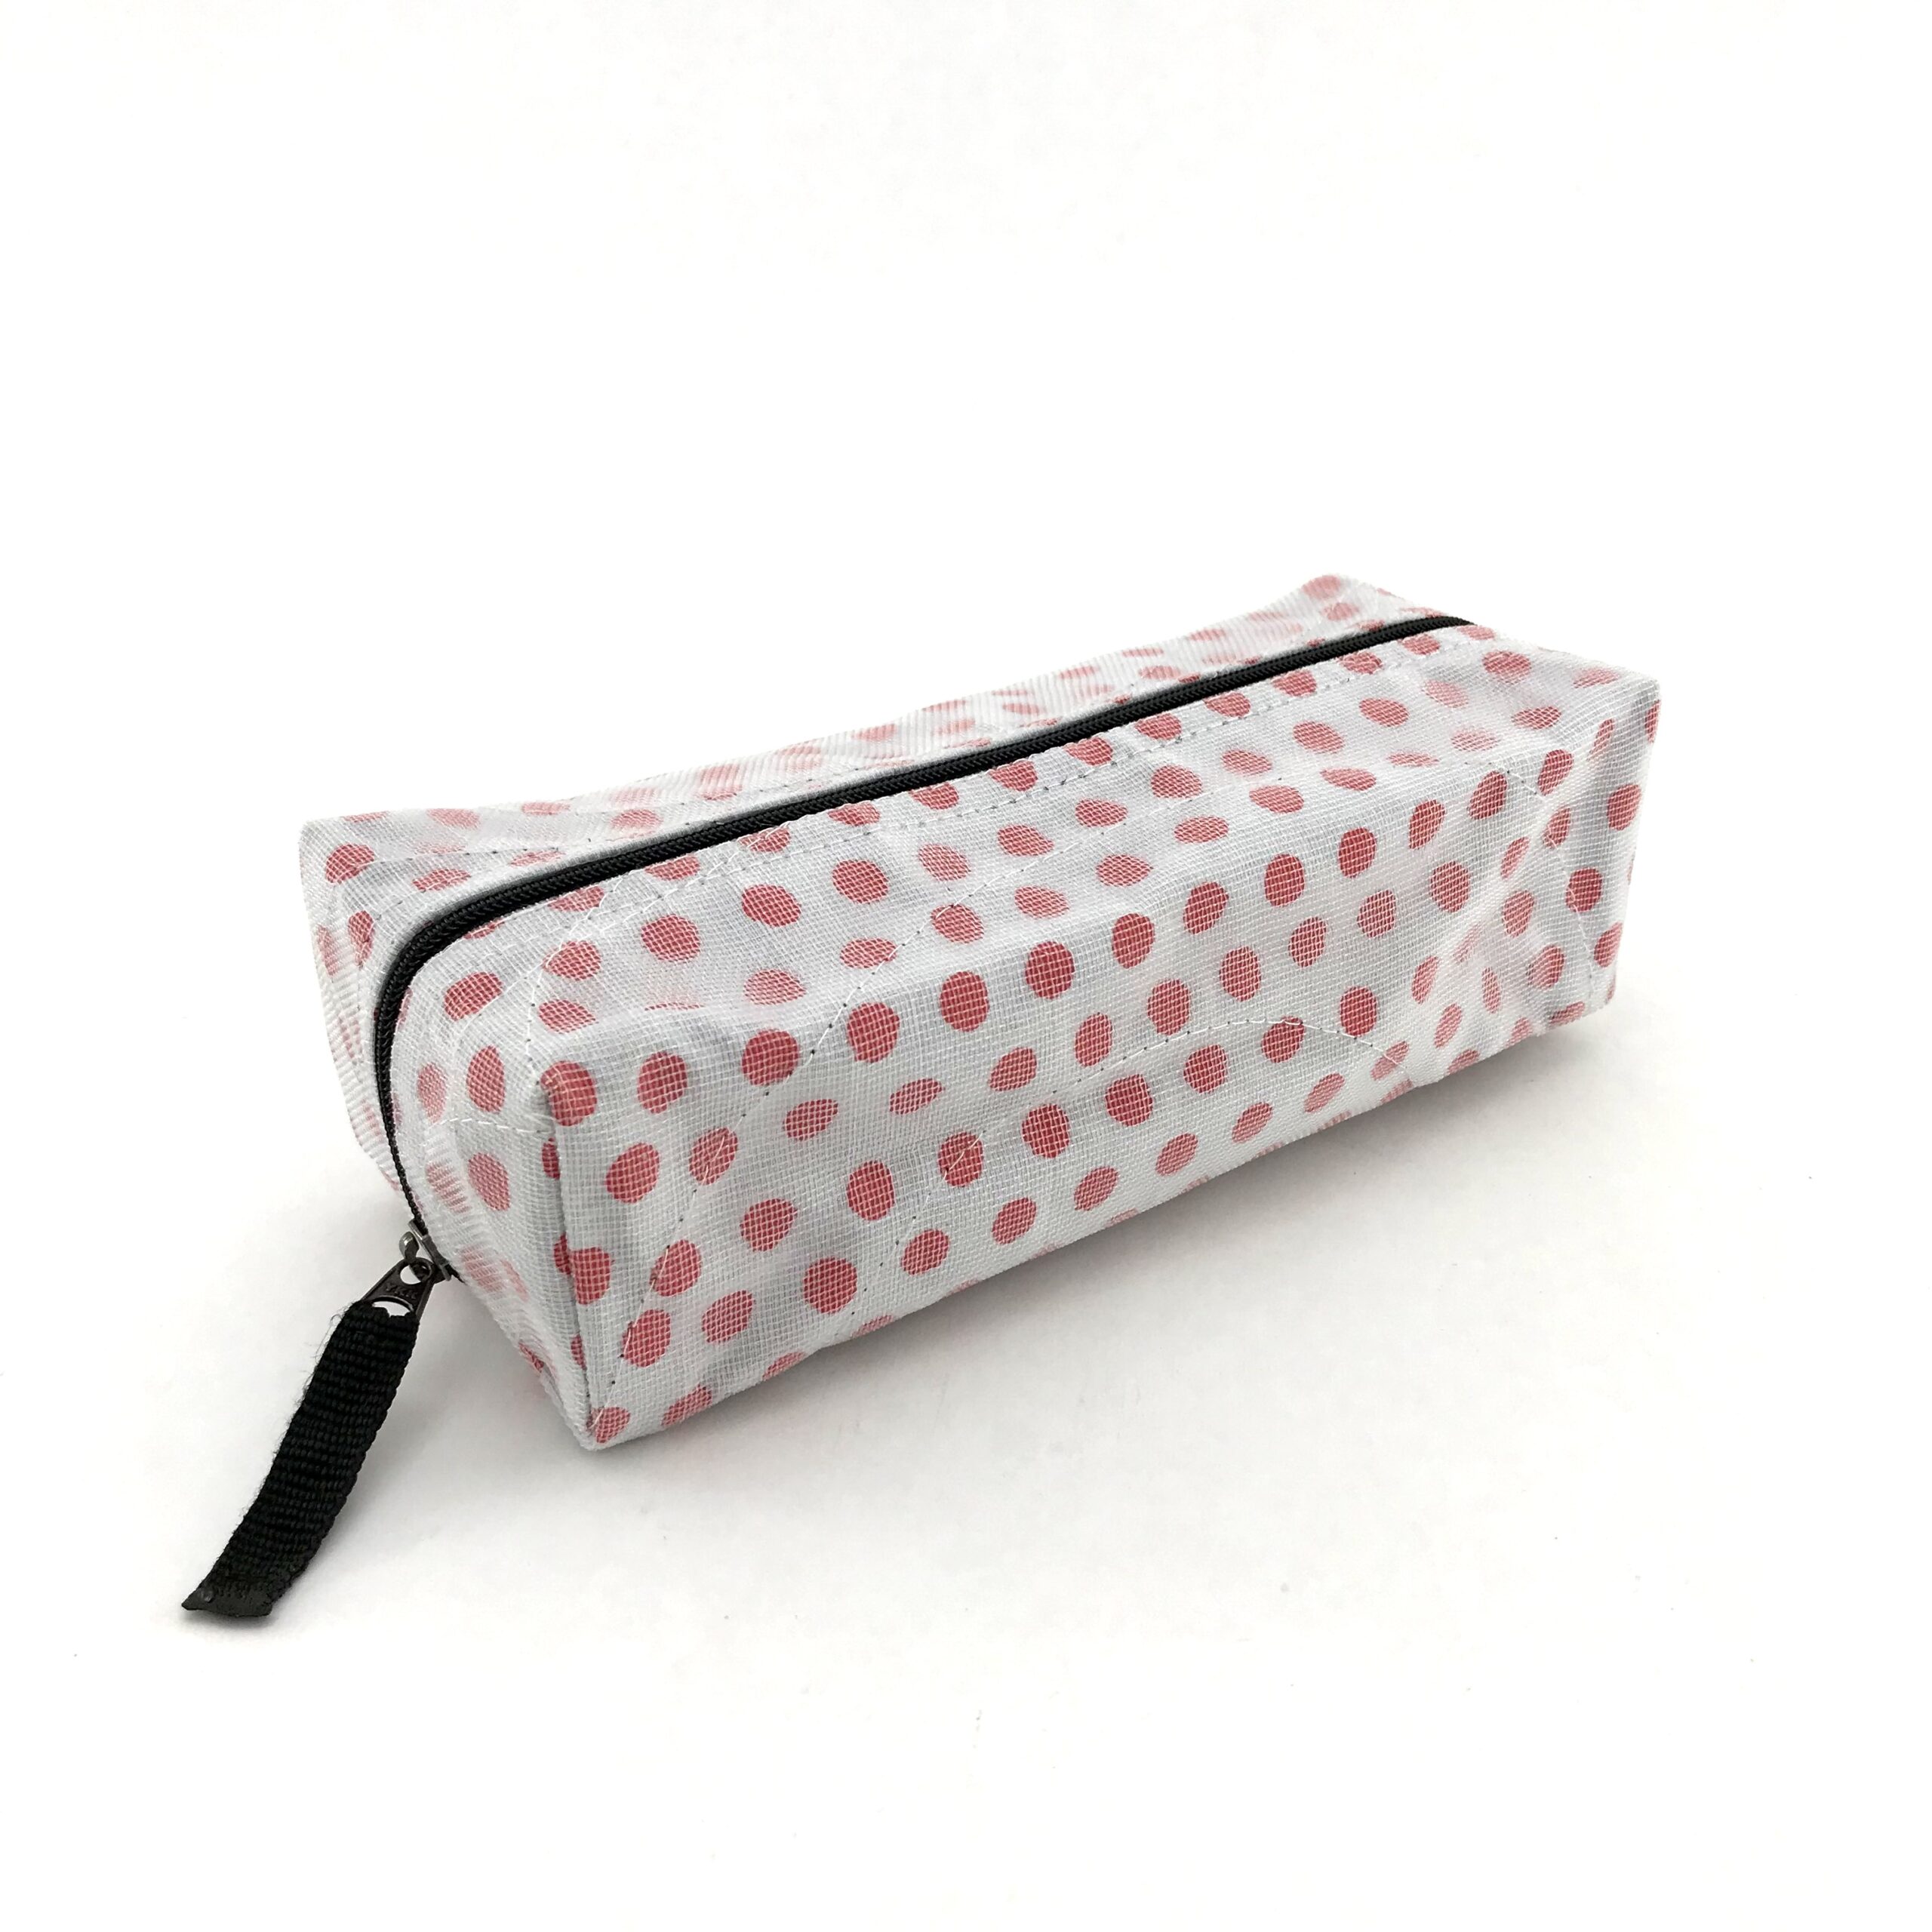 Ethical pencil case - Red dots